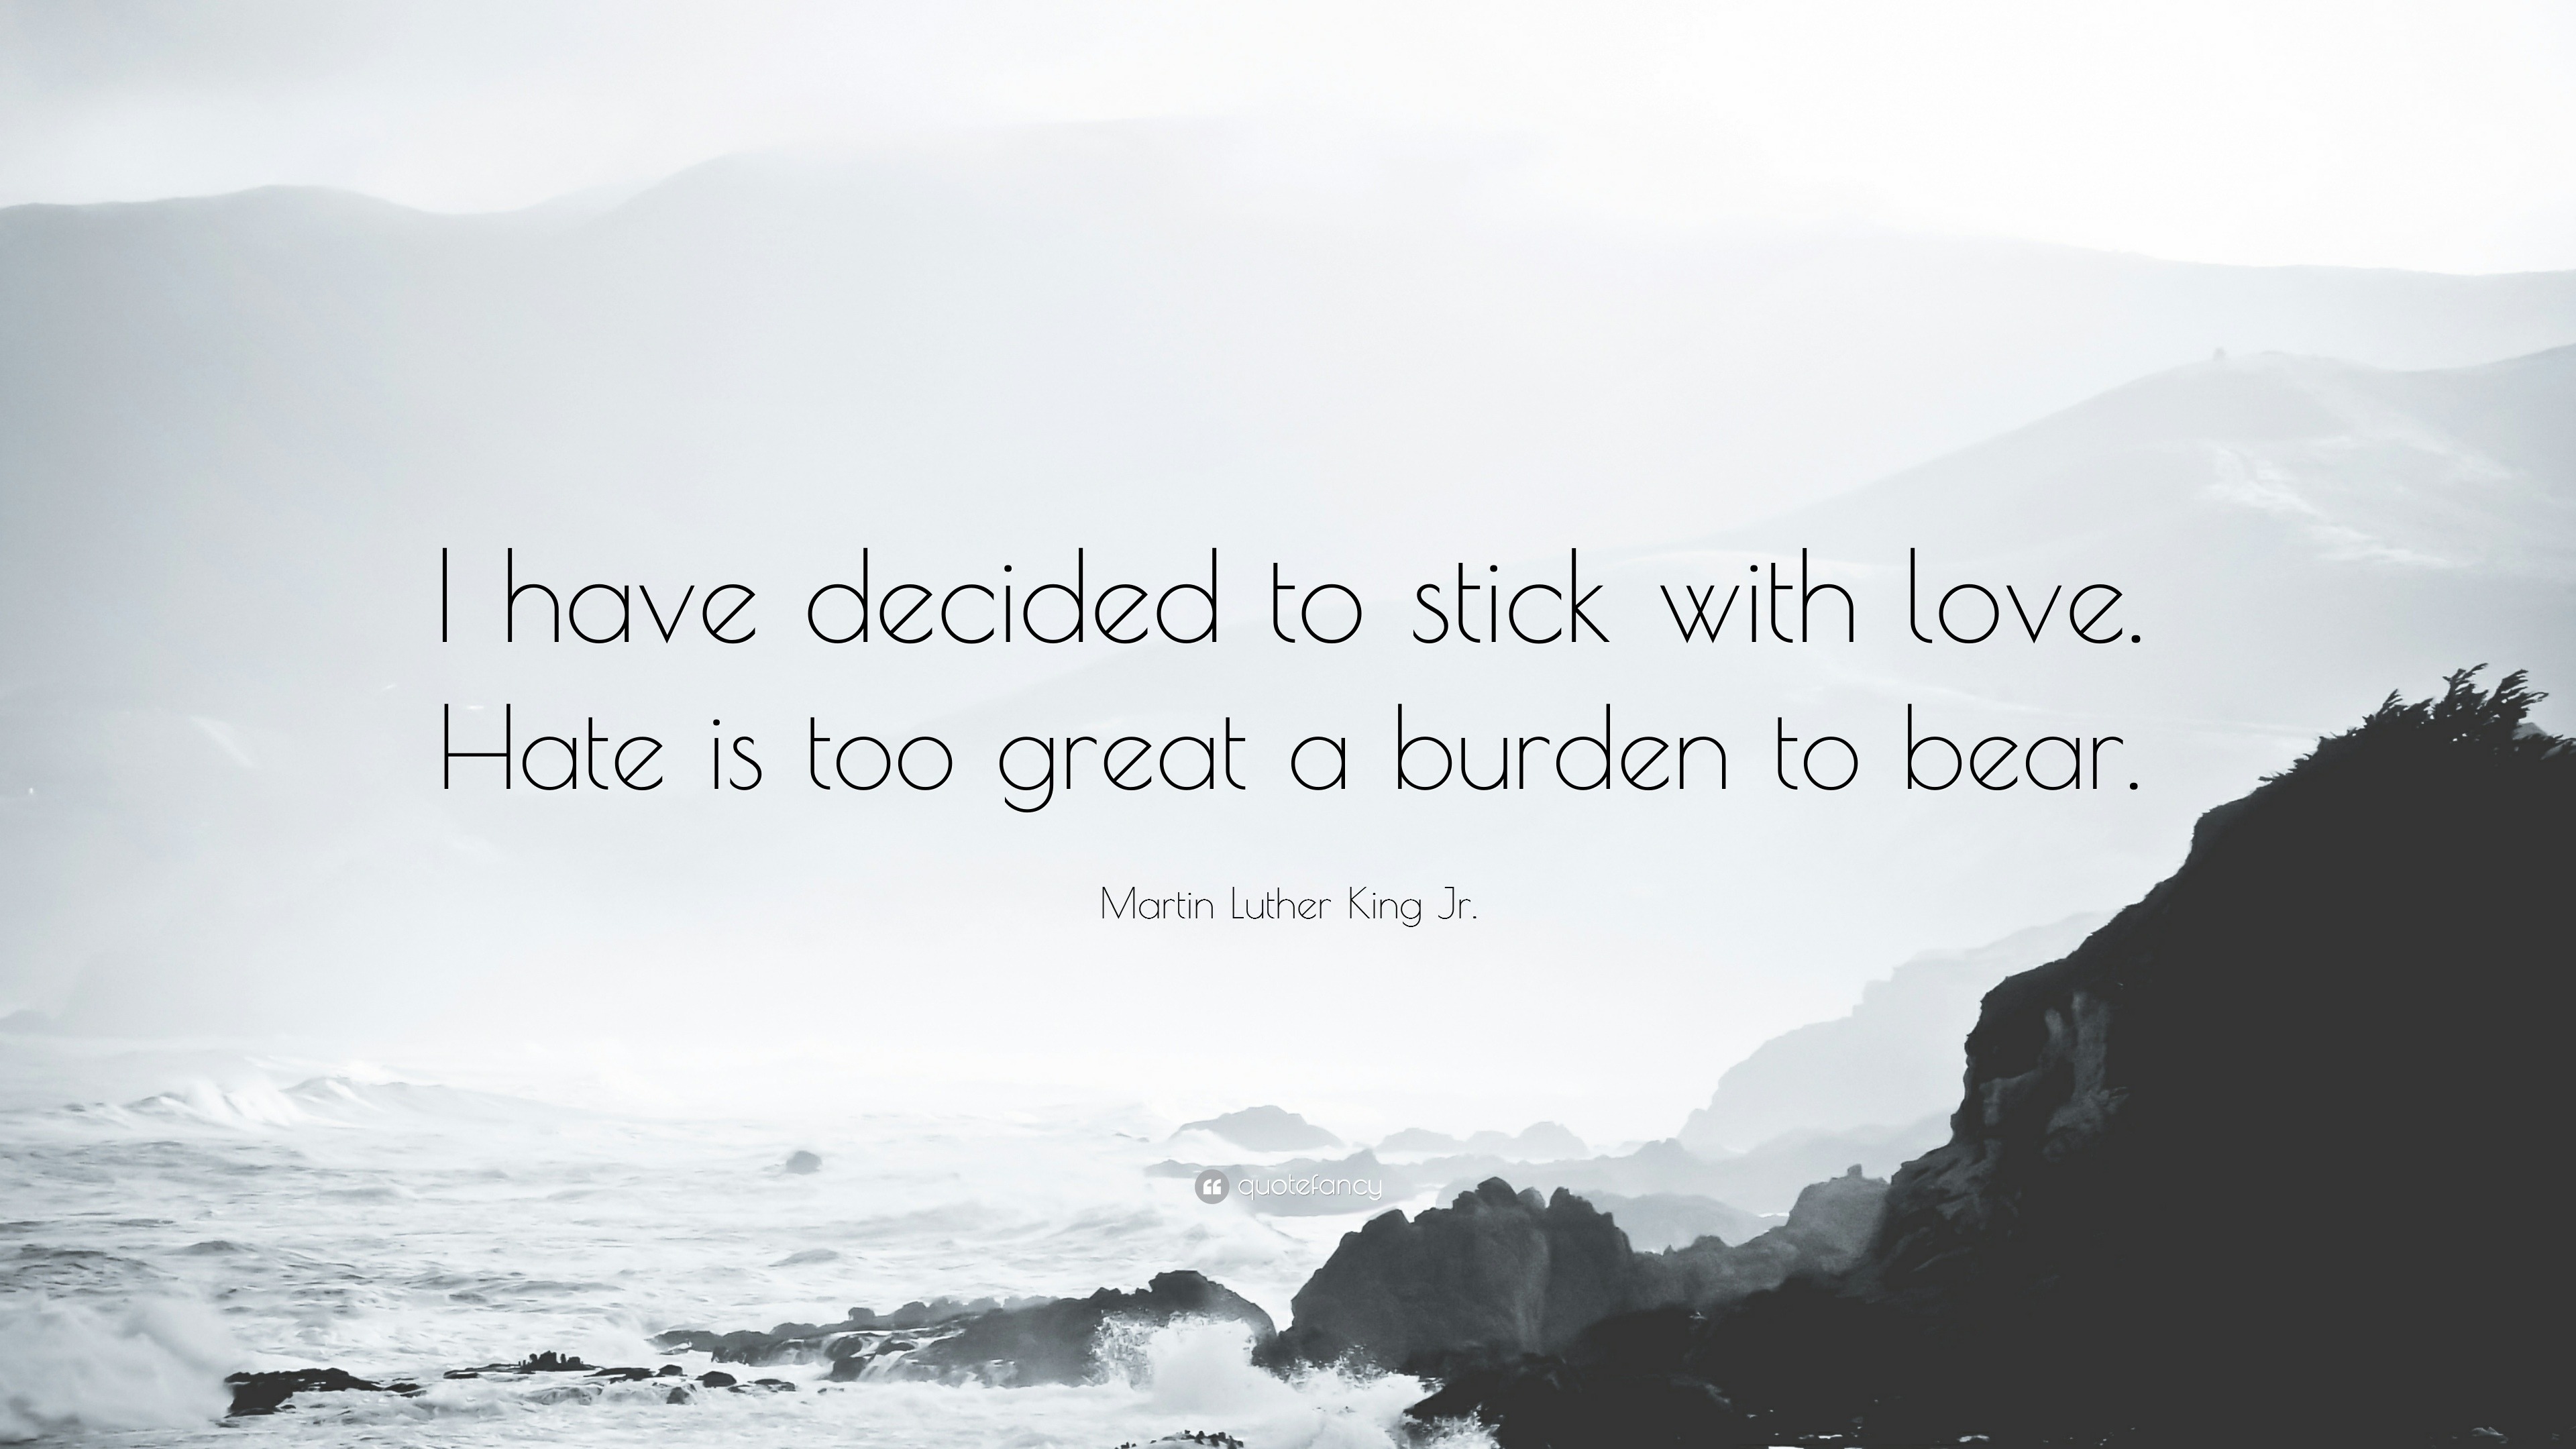 Love Quotes “I have decided to stick with love Hate is too great